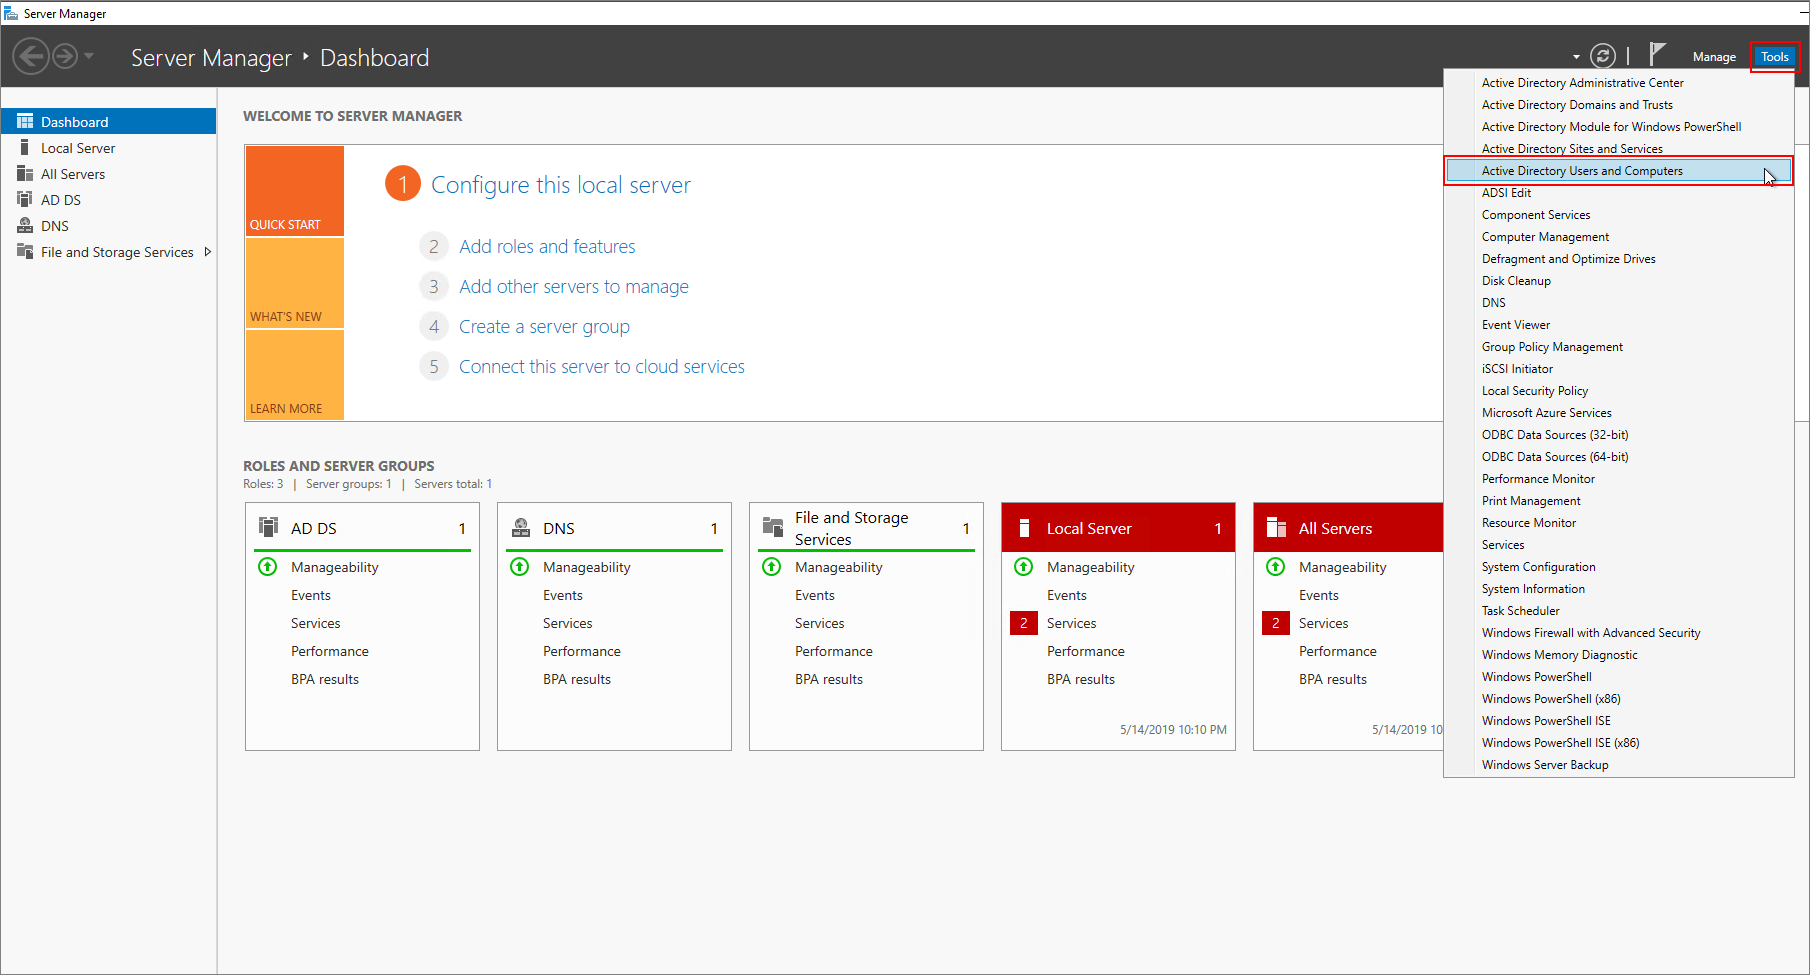 On the Server Manager dashboard, open Active Directory Management.